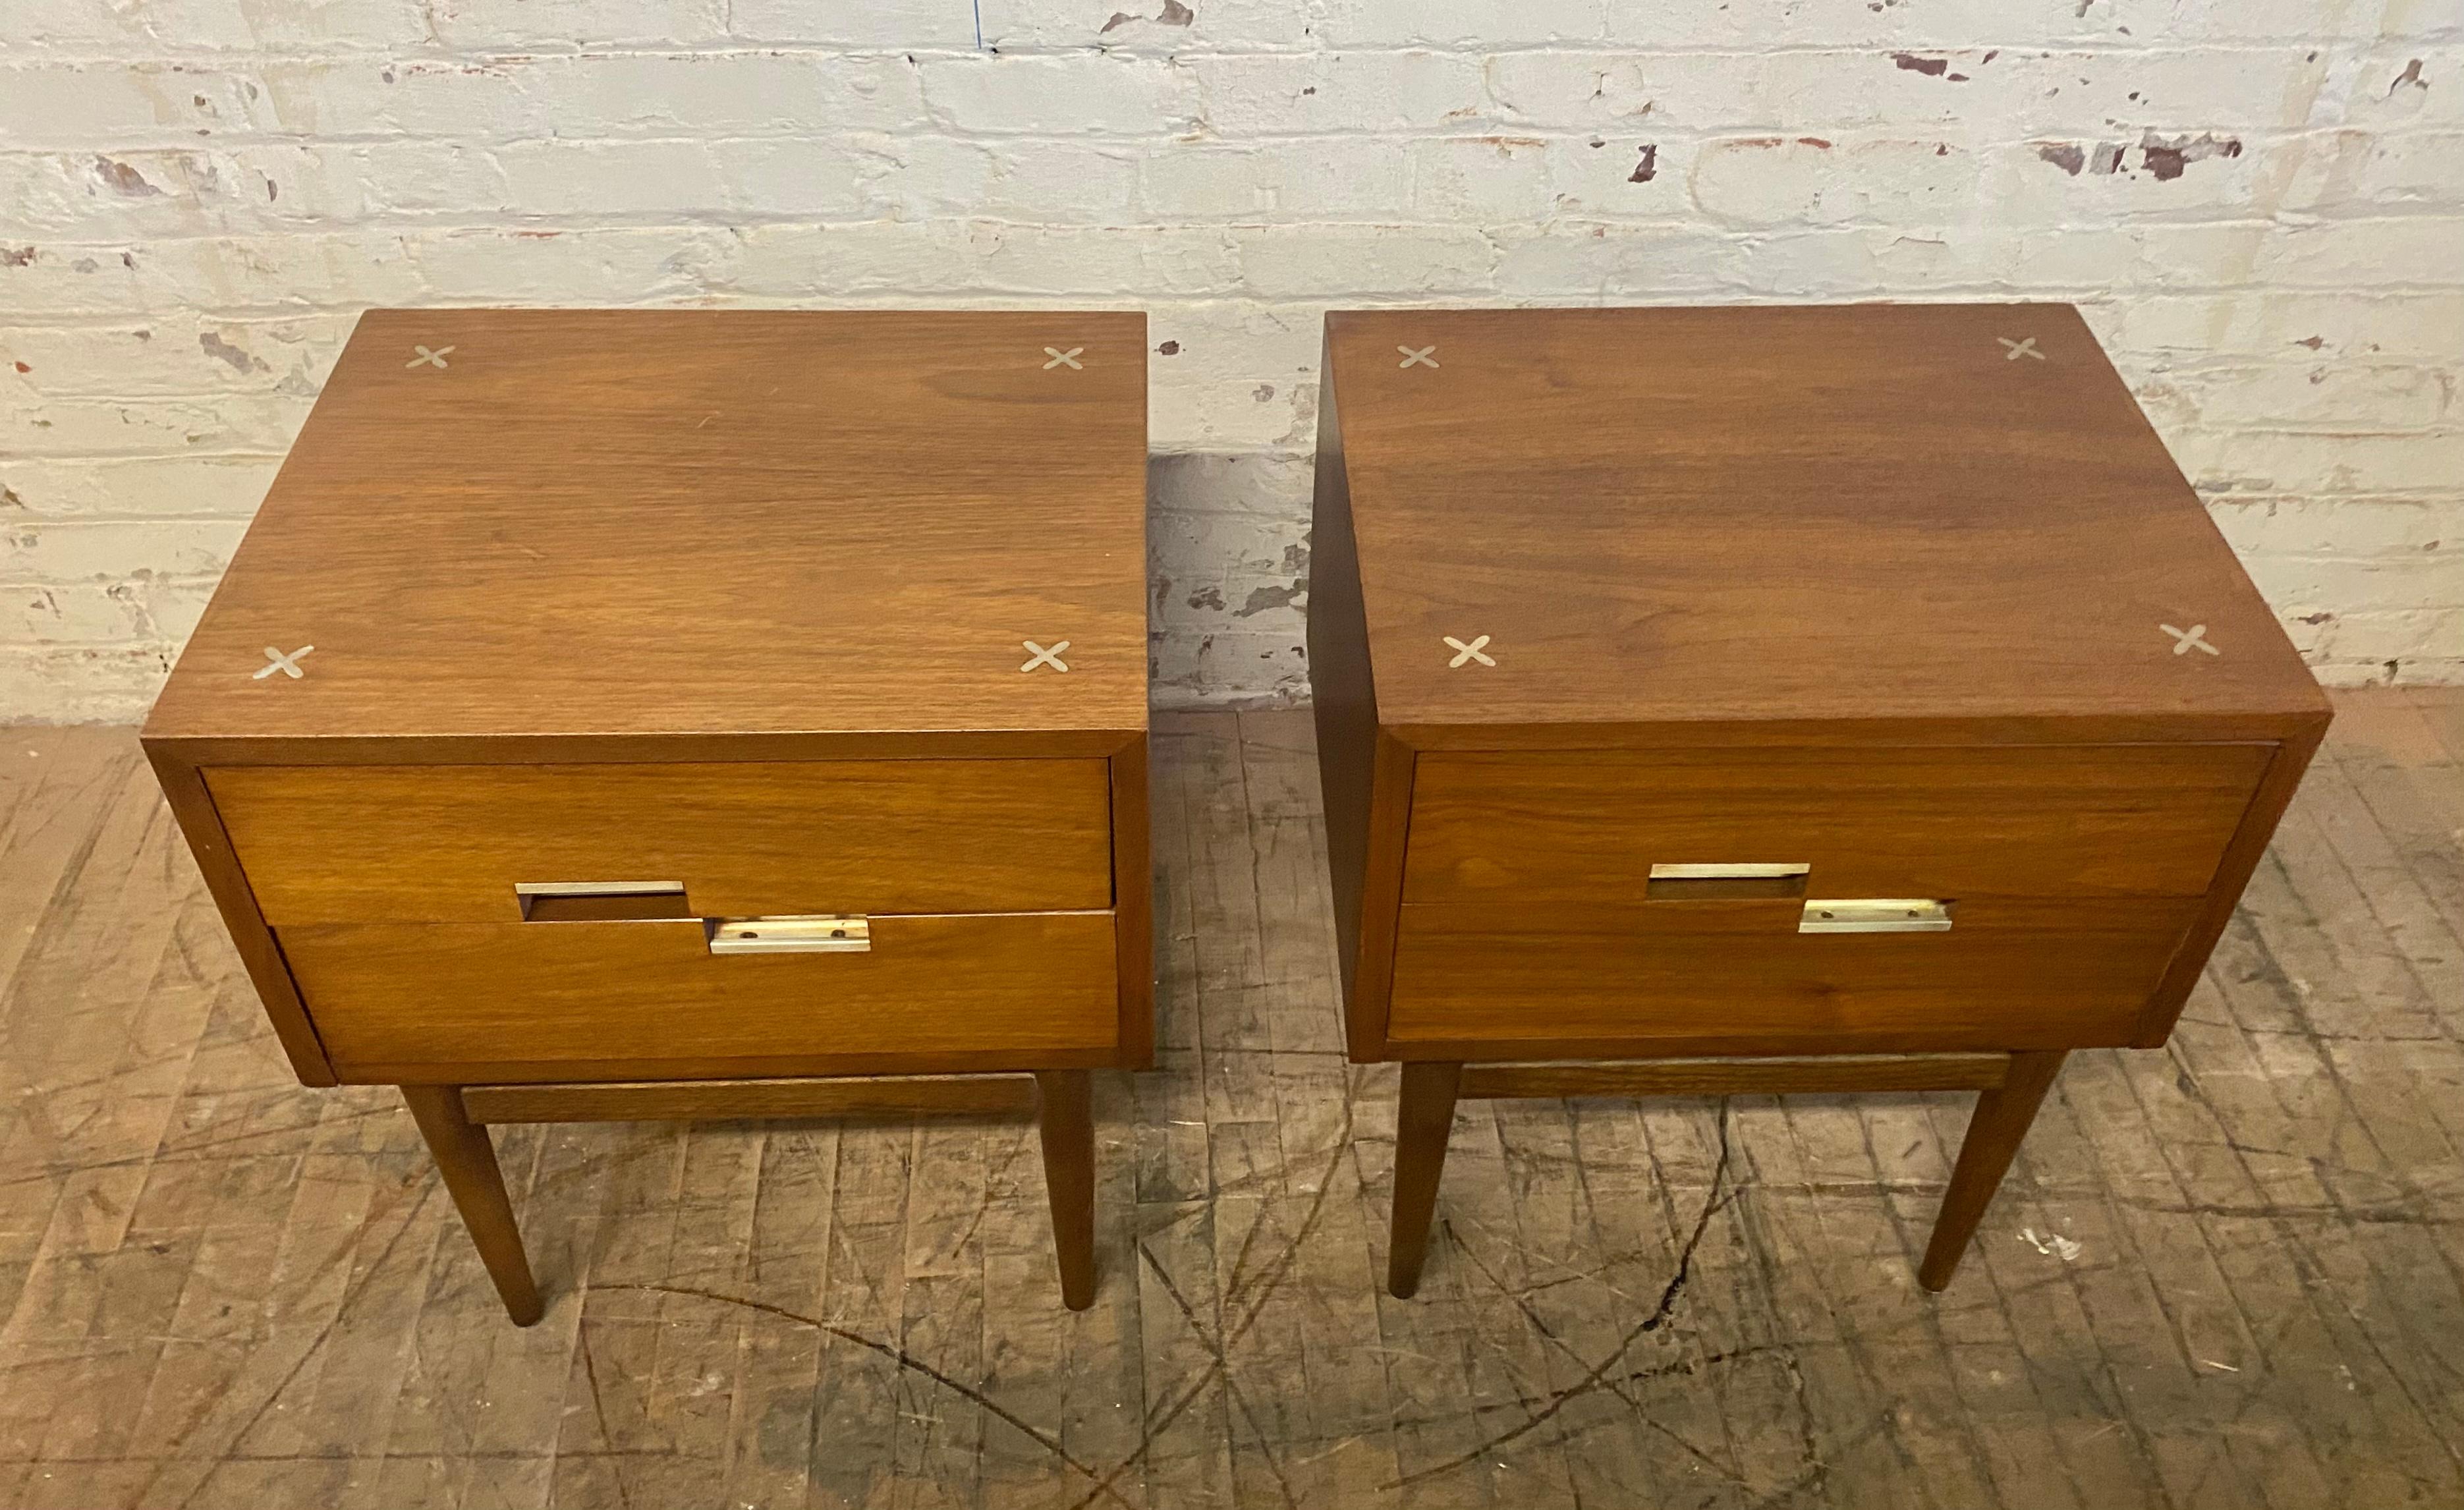 Mid-20th Century American of Martinsville Accord Walnut Nightstands or End Table with X’s